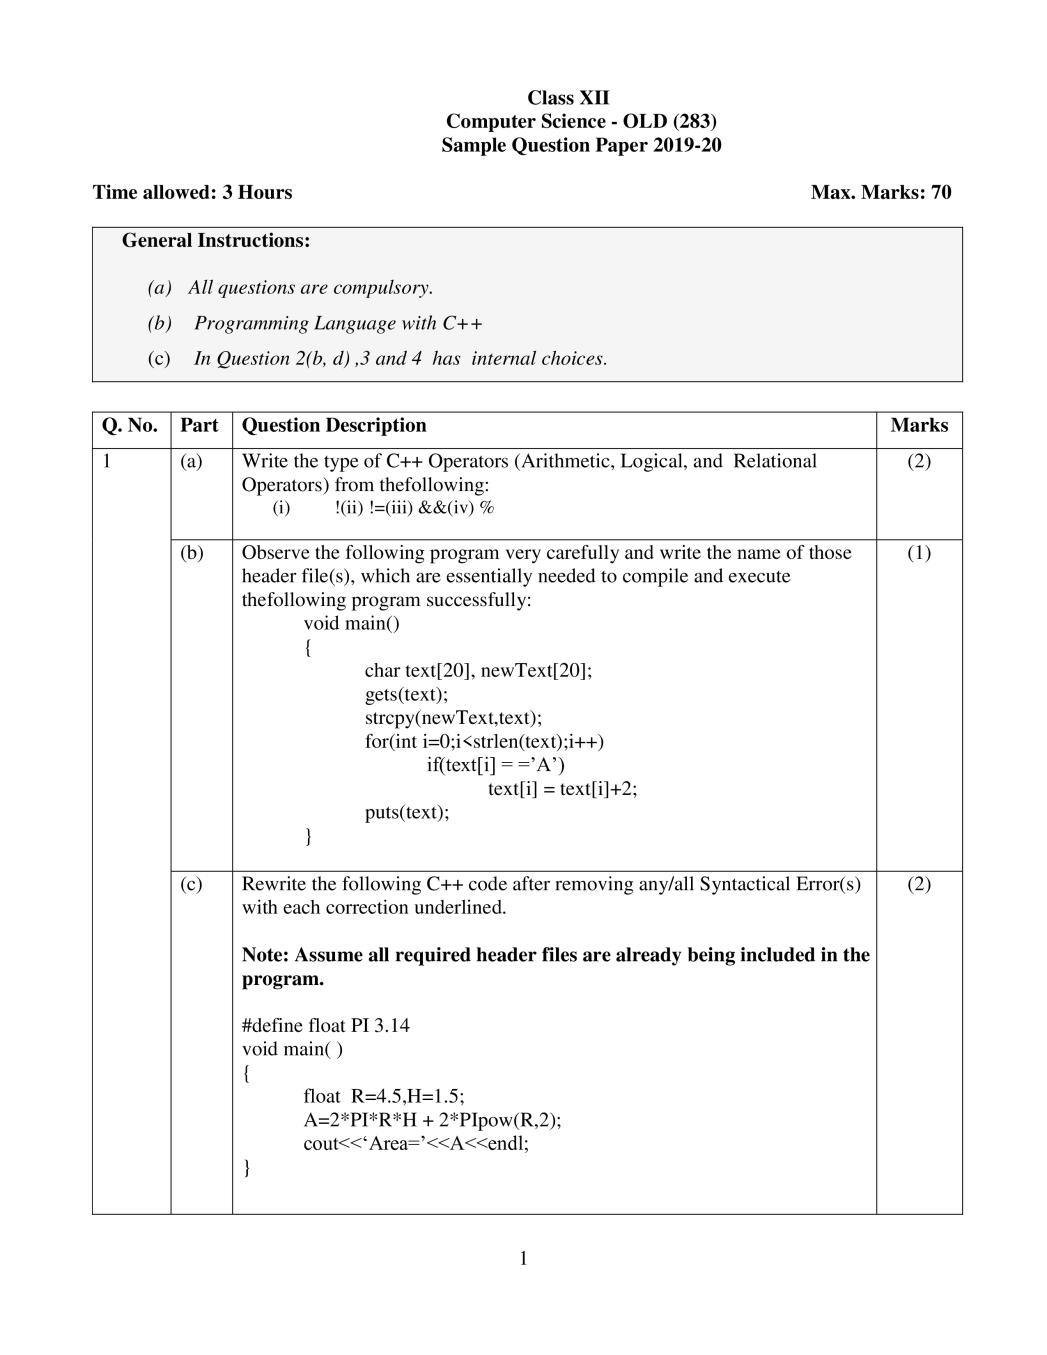 CBSE Class 12 Sample Paper 2020 for Computer Science Old - Page 1